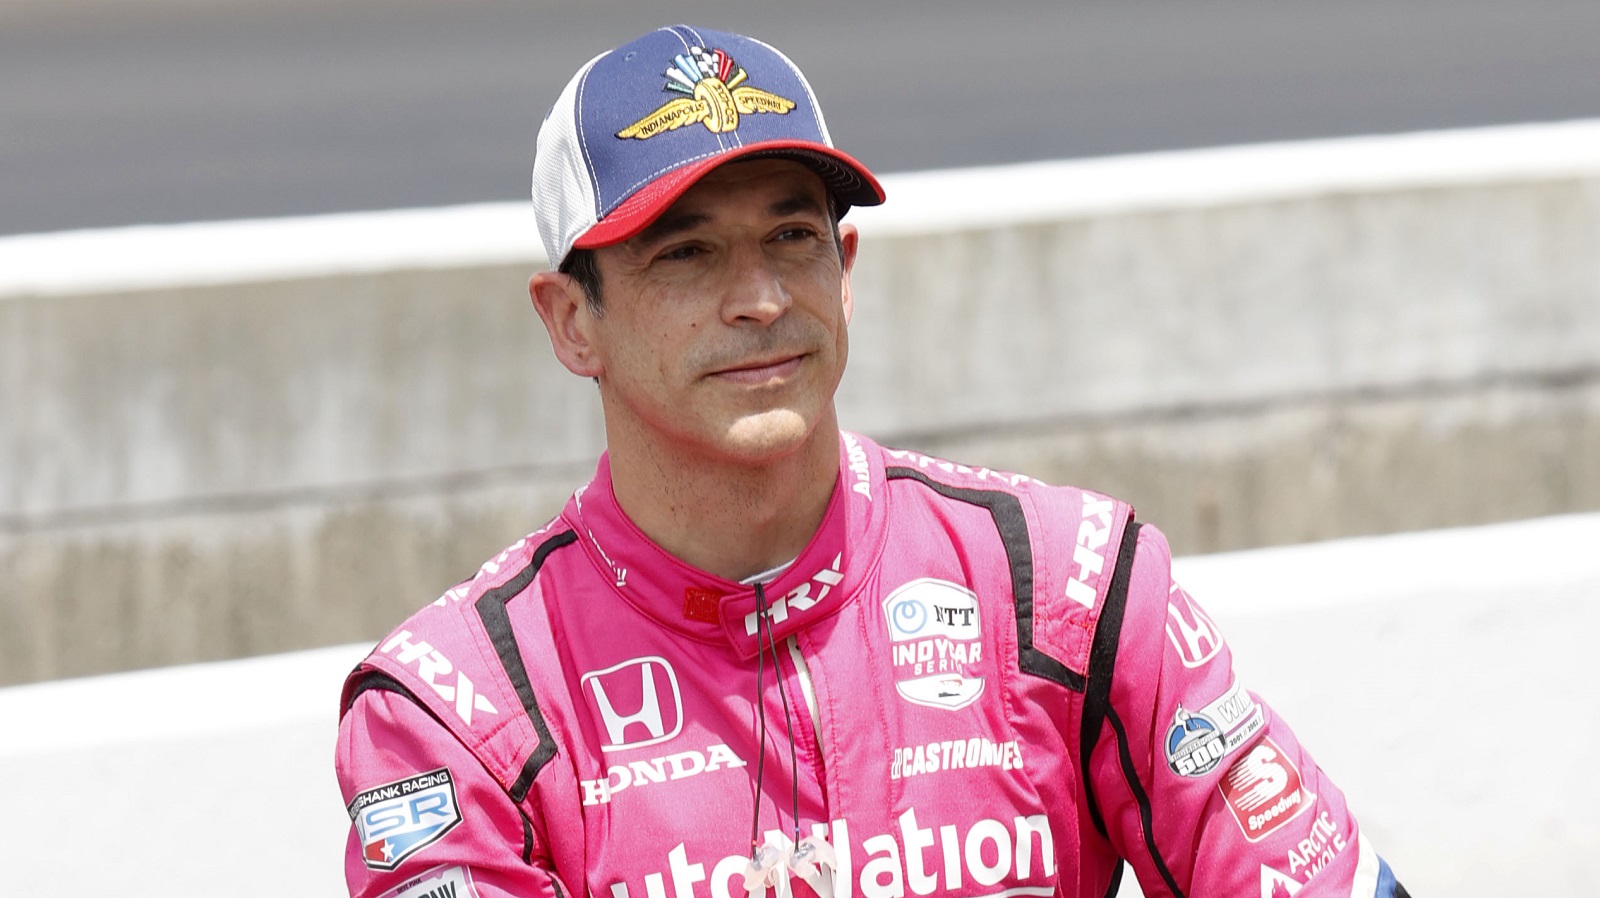 IndyCar driver Helio Castroneves poses for a photo with his car on May 21, 2022, after qualifying for the 106th running of the Indianapolis 500 at the Indianapolis Motor Speedway.